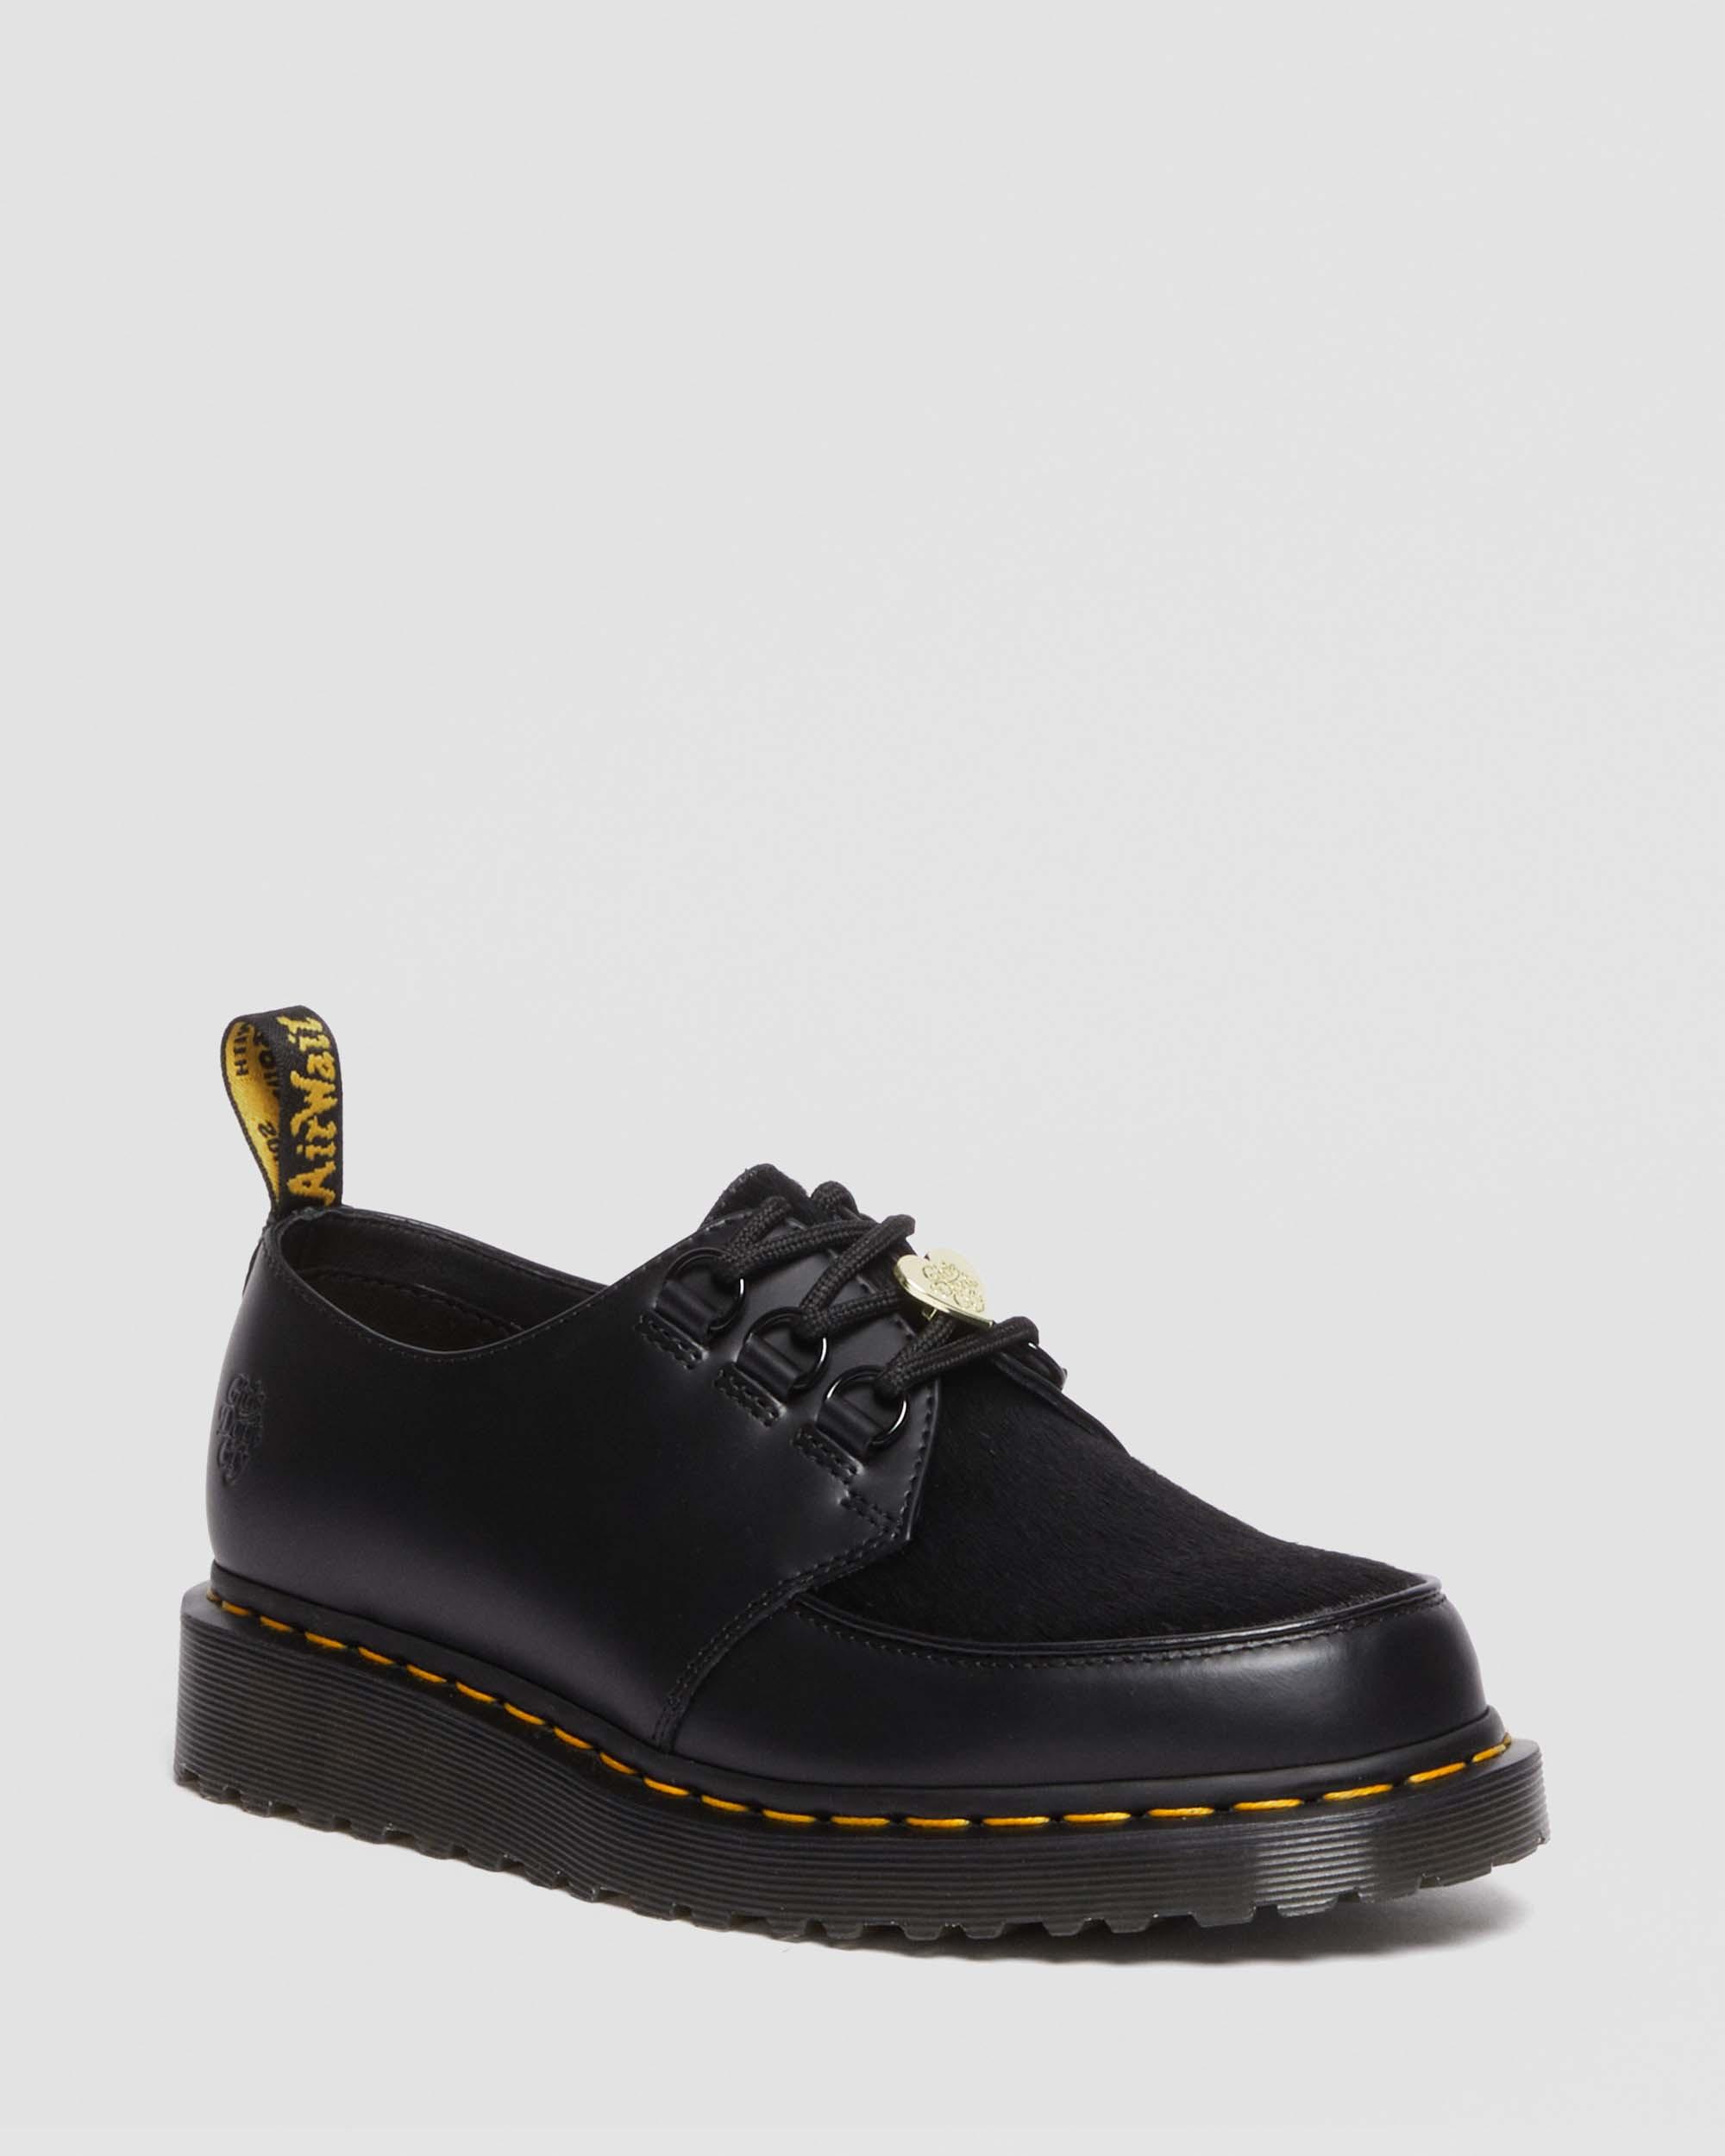 DR MARTENS Ramsey Girls Don't Cry Hair-on Leather Creeper Shoes